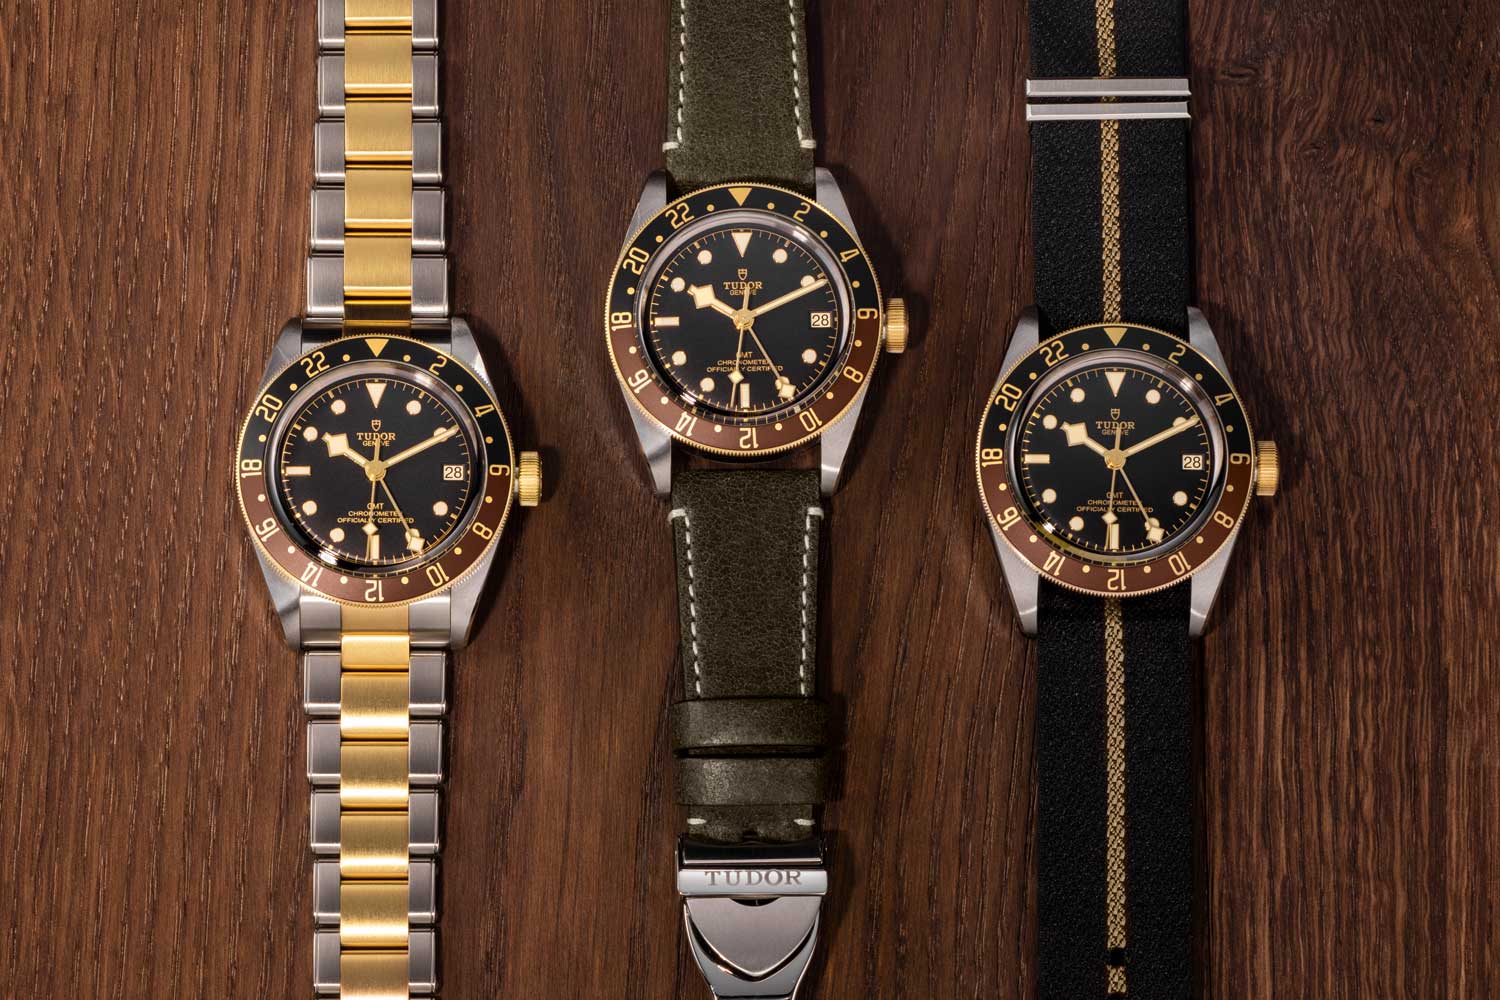 The new Black Bay GMT S&G works on any of the available strap options: S&G rivet bracelet, leather with folding clasp or NATO with beige stripe. (image: Tudor)